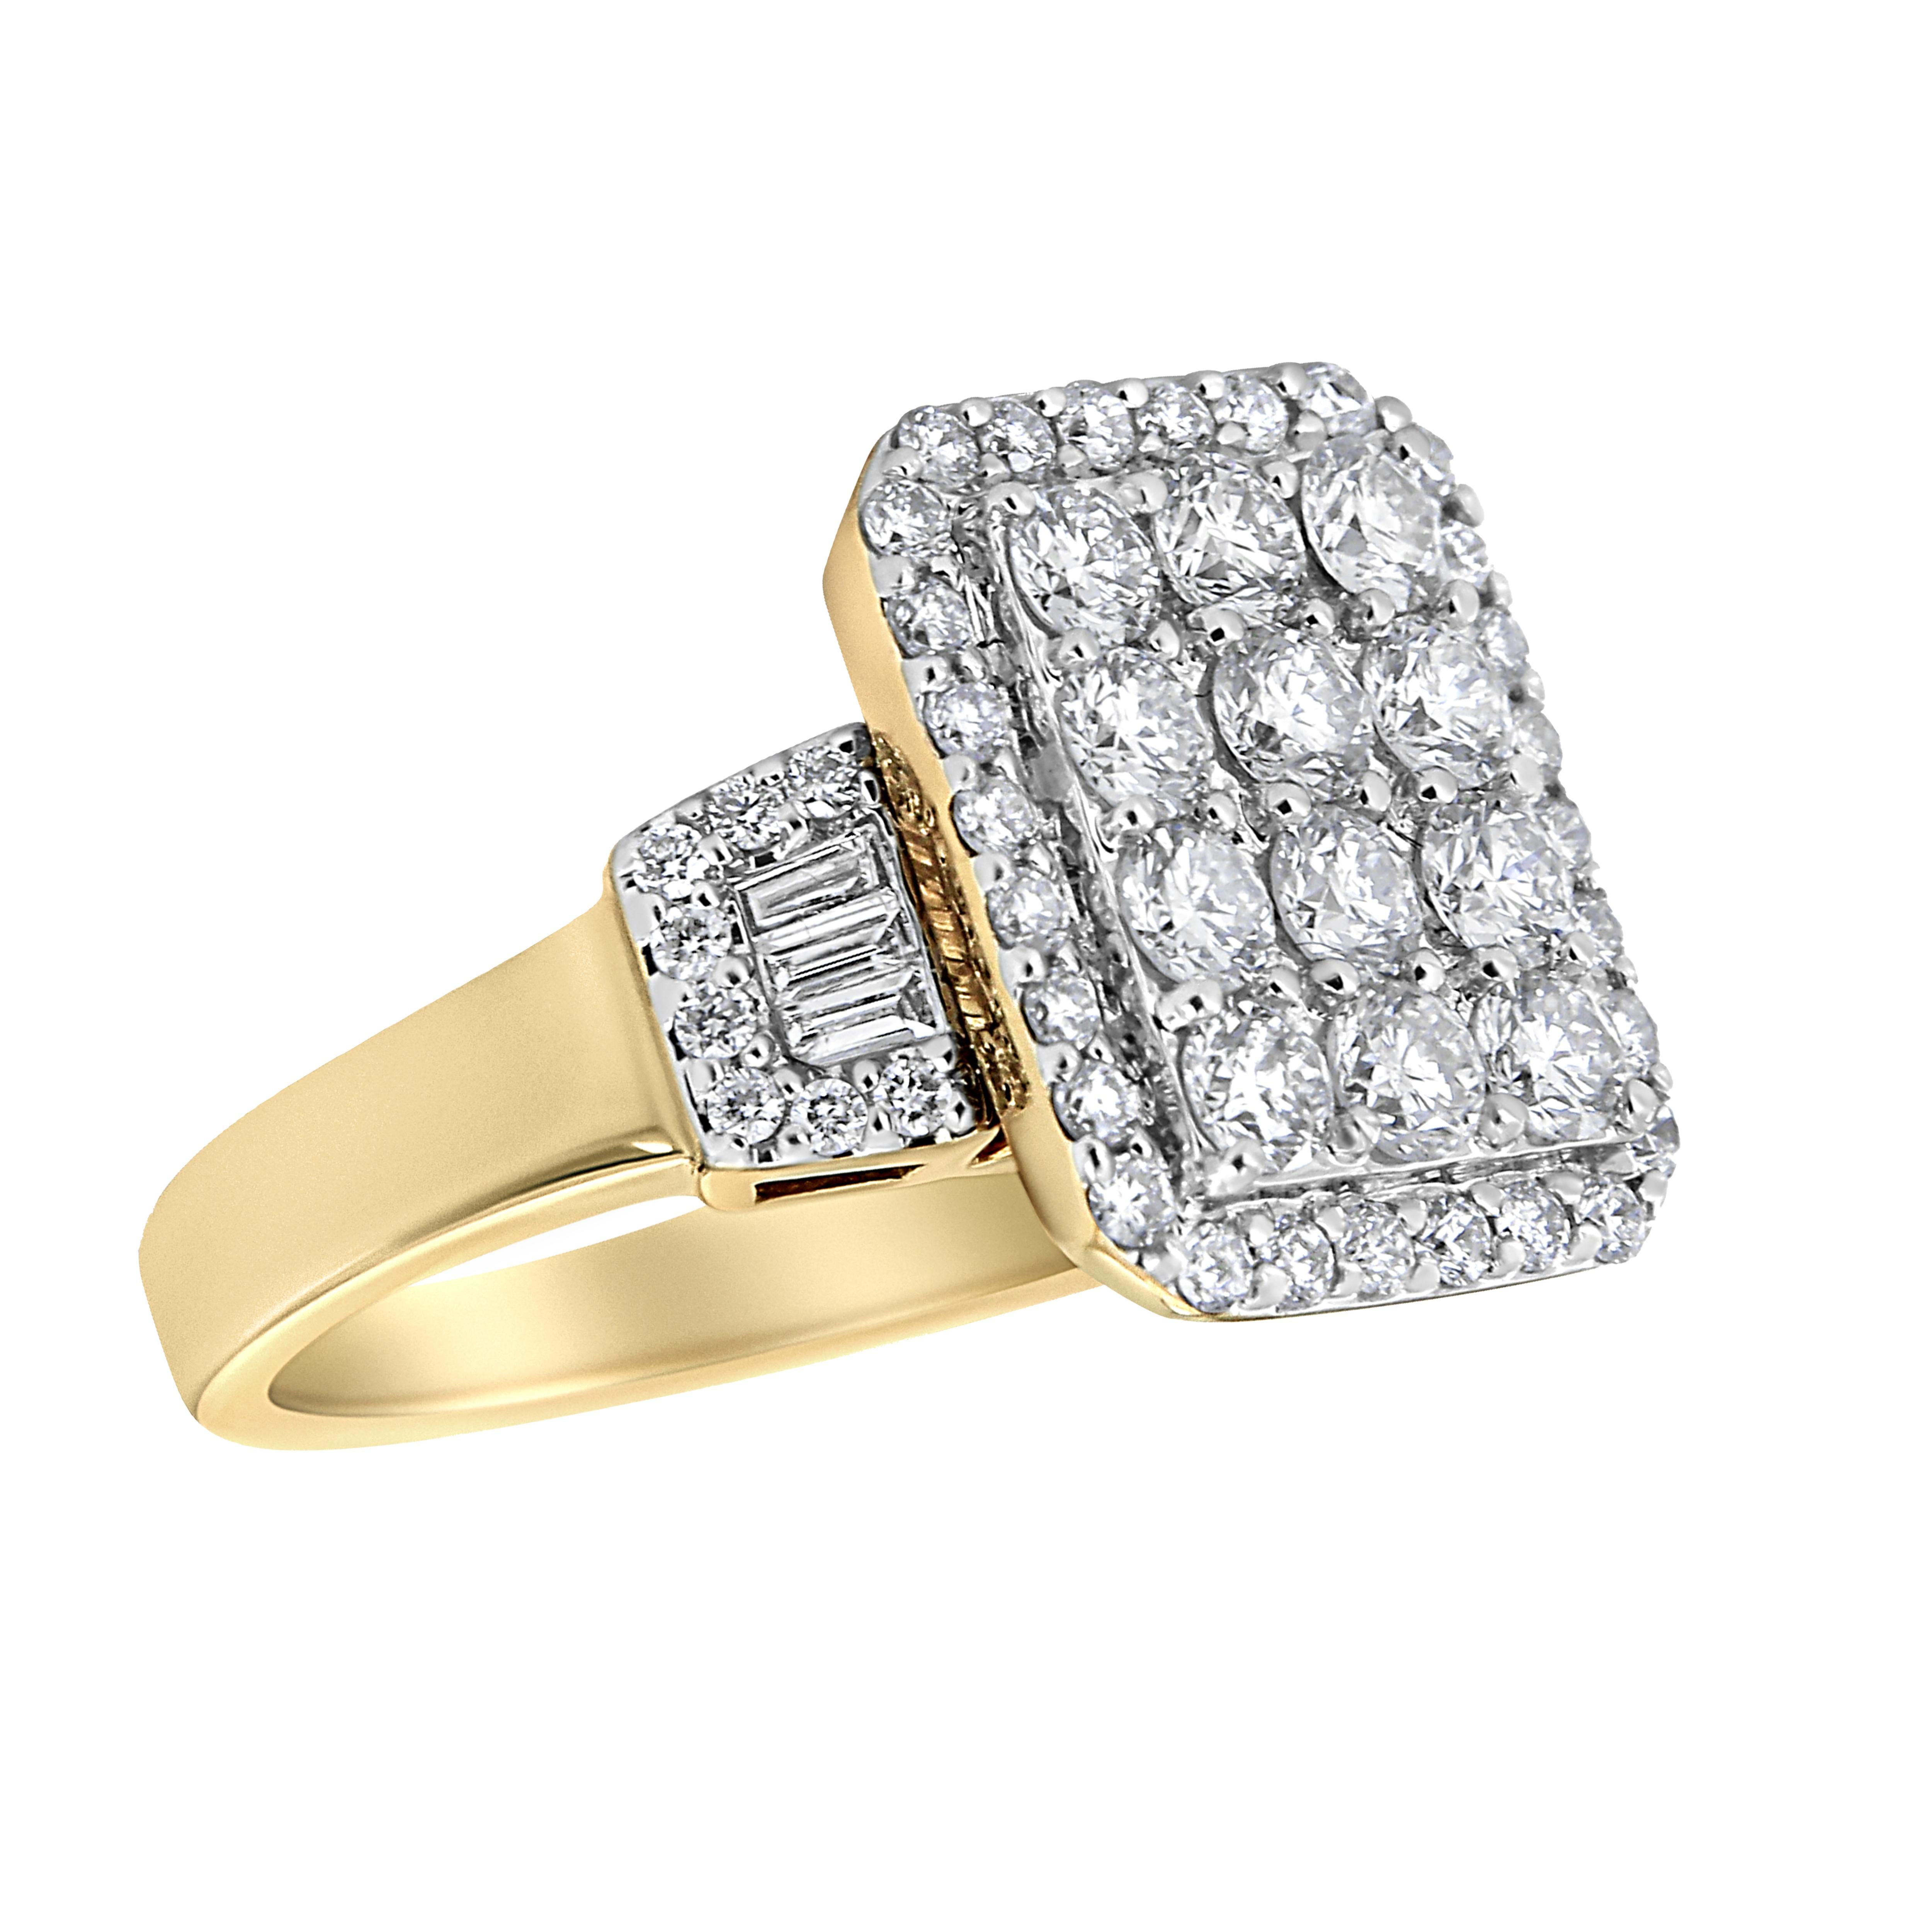 Bold and brilliant, this 14k yellow gold cocktail ring is a statement piece and will catch the eye of every onlooker. With a total carat weight of 2 1/4 cttw, this ring will add glamour to every one of your outfits. Round-cut diamonds are